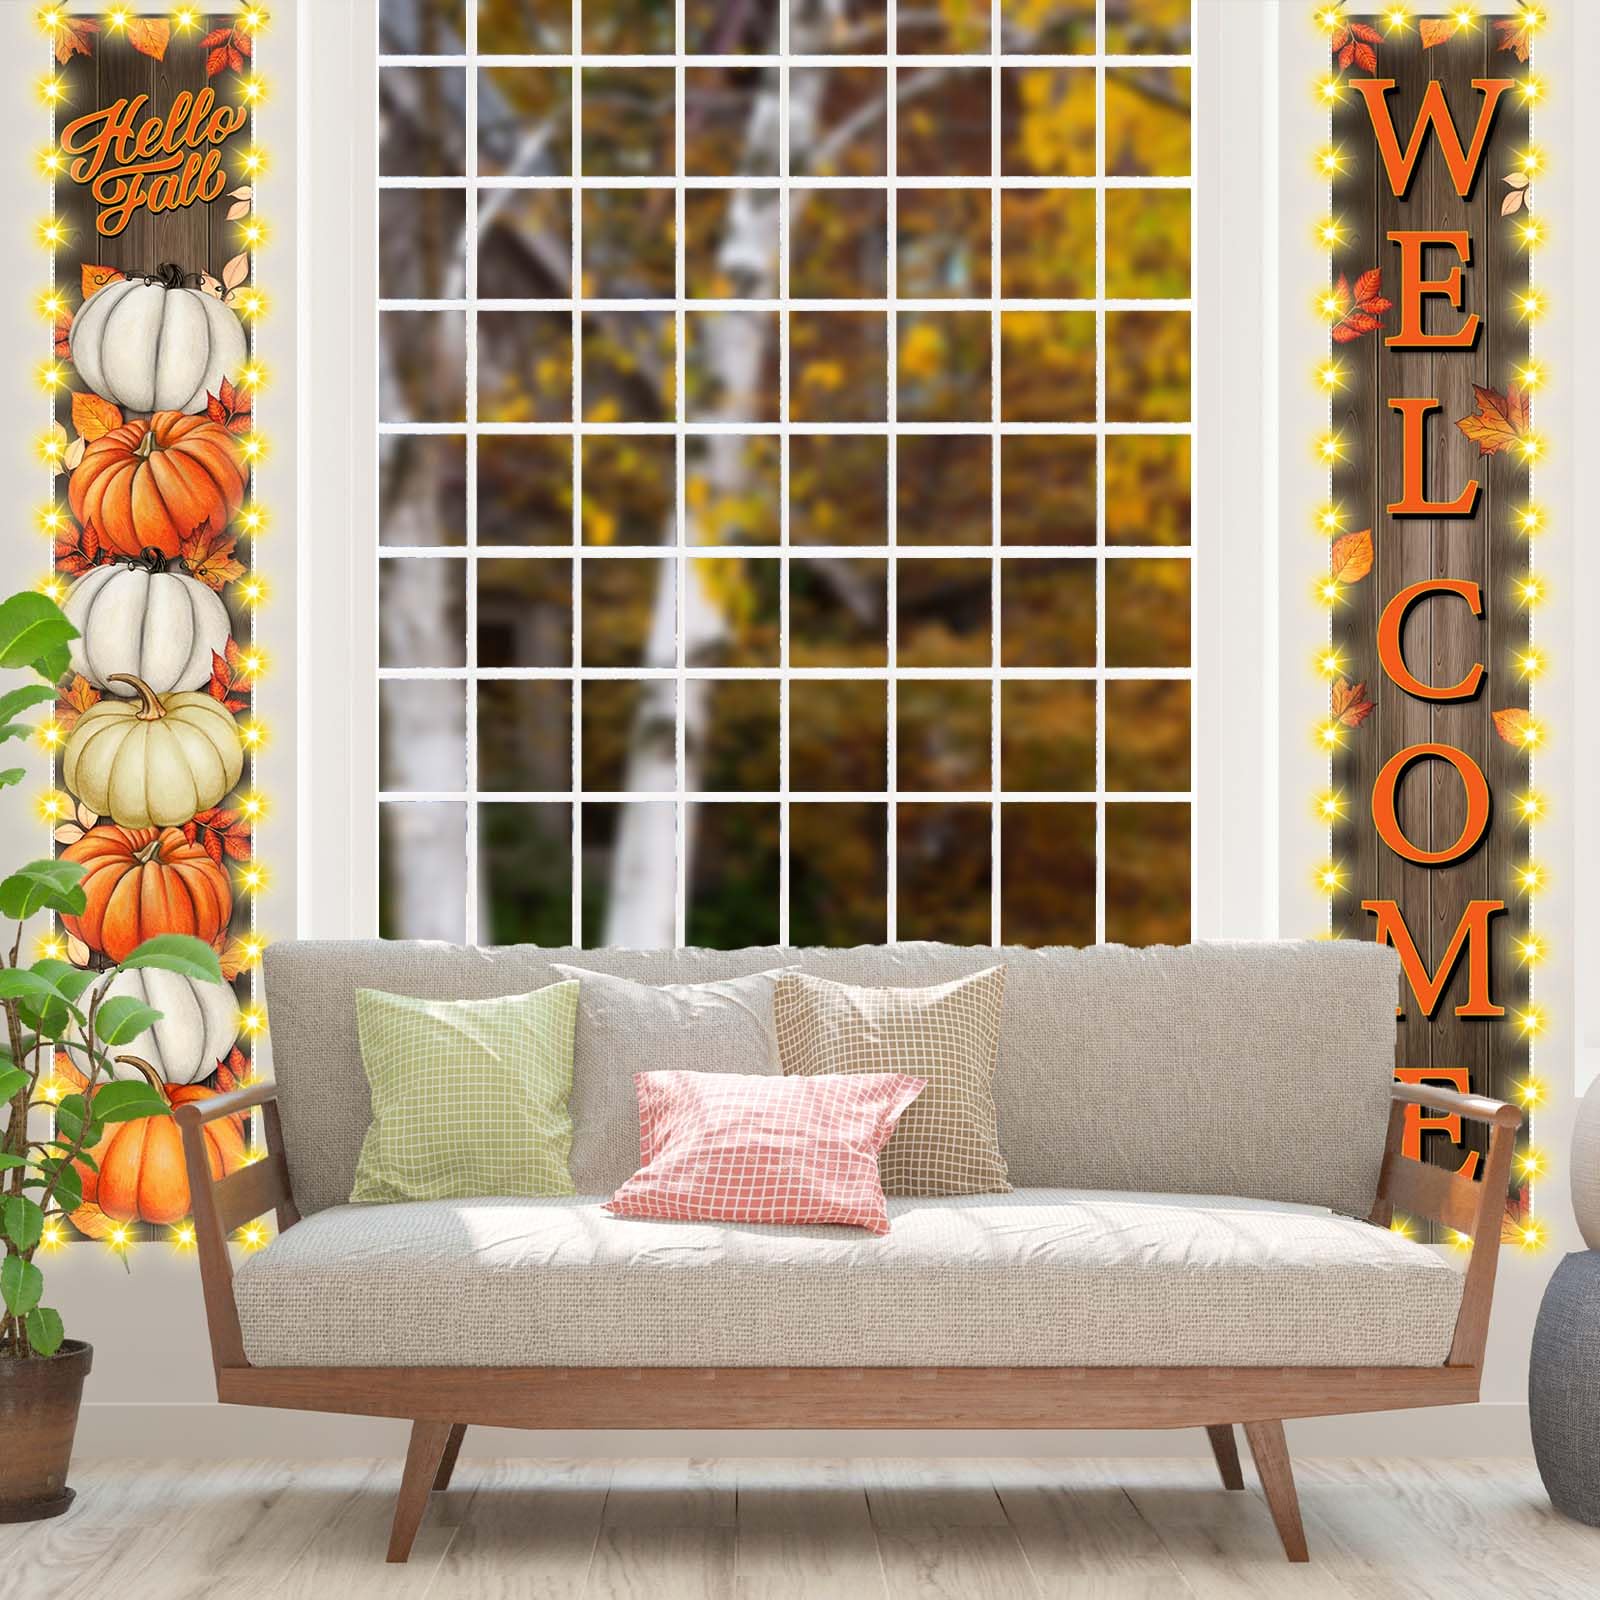 Pumpkin Maple Leaves Leaf Door Porch Banner Fall Banner Autumn Thanksgiving Decorations Board Wall Hanging Farmhouse Supplies Pumpkin Porch Decorations Outdoor for Home Office Holiday Decor